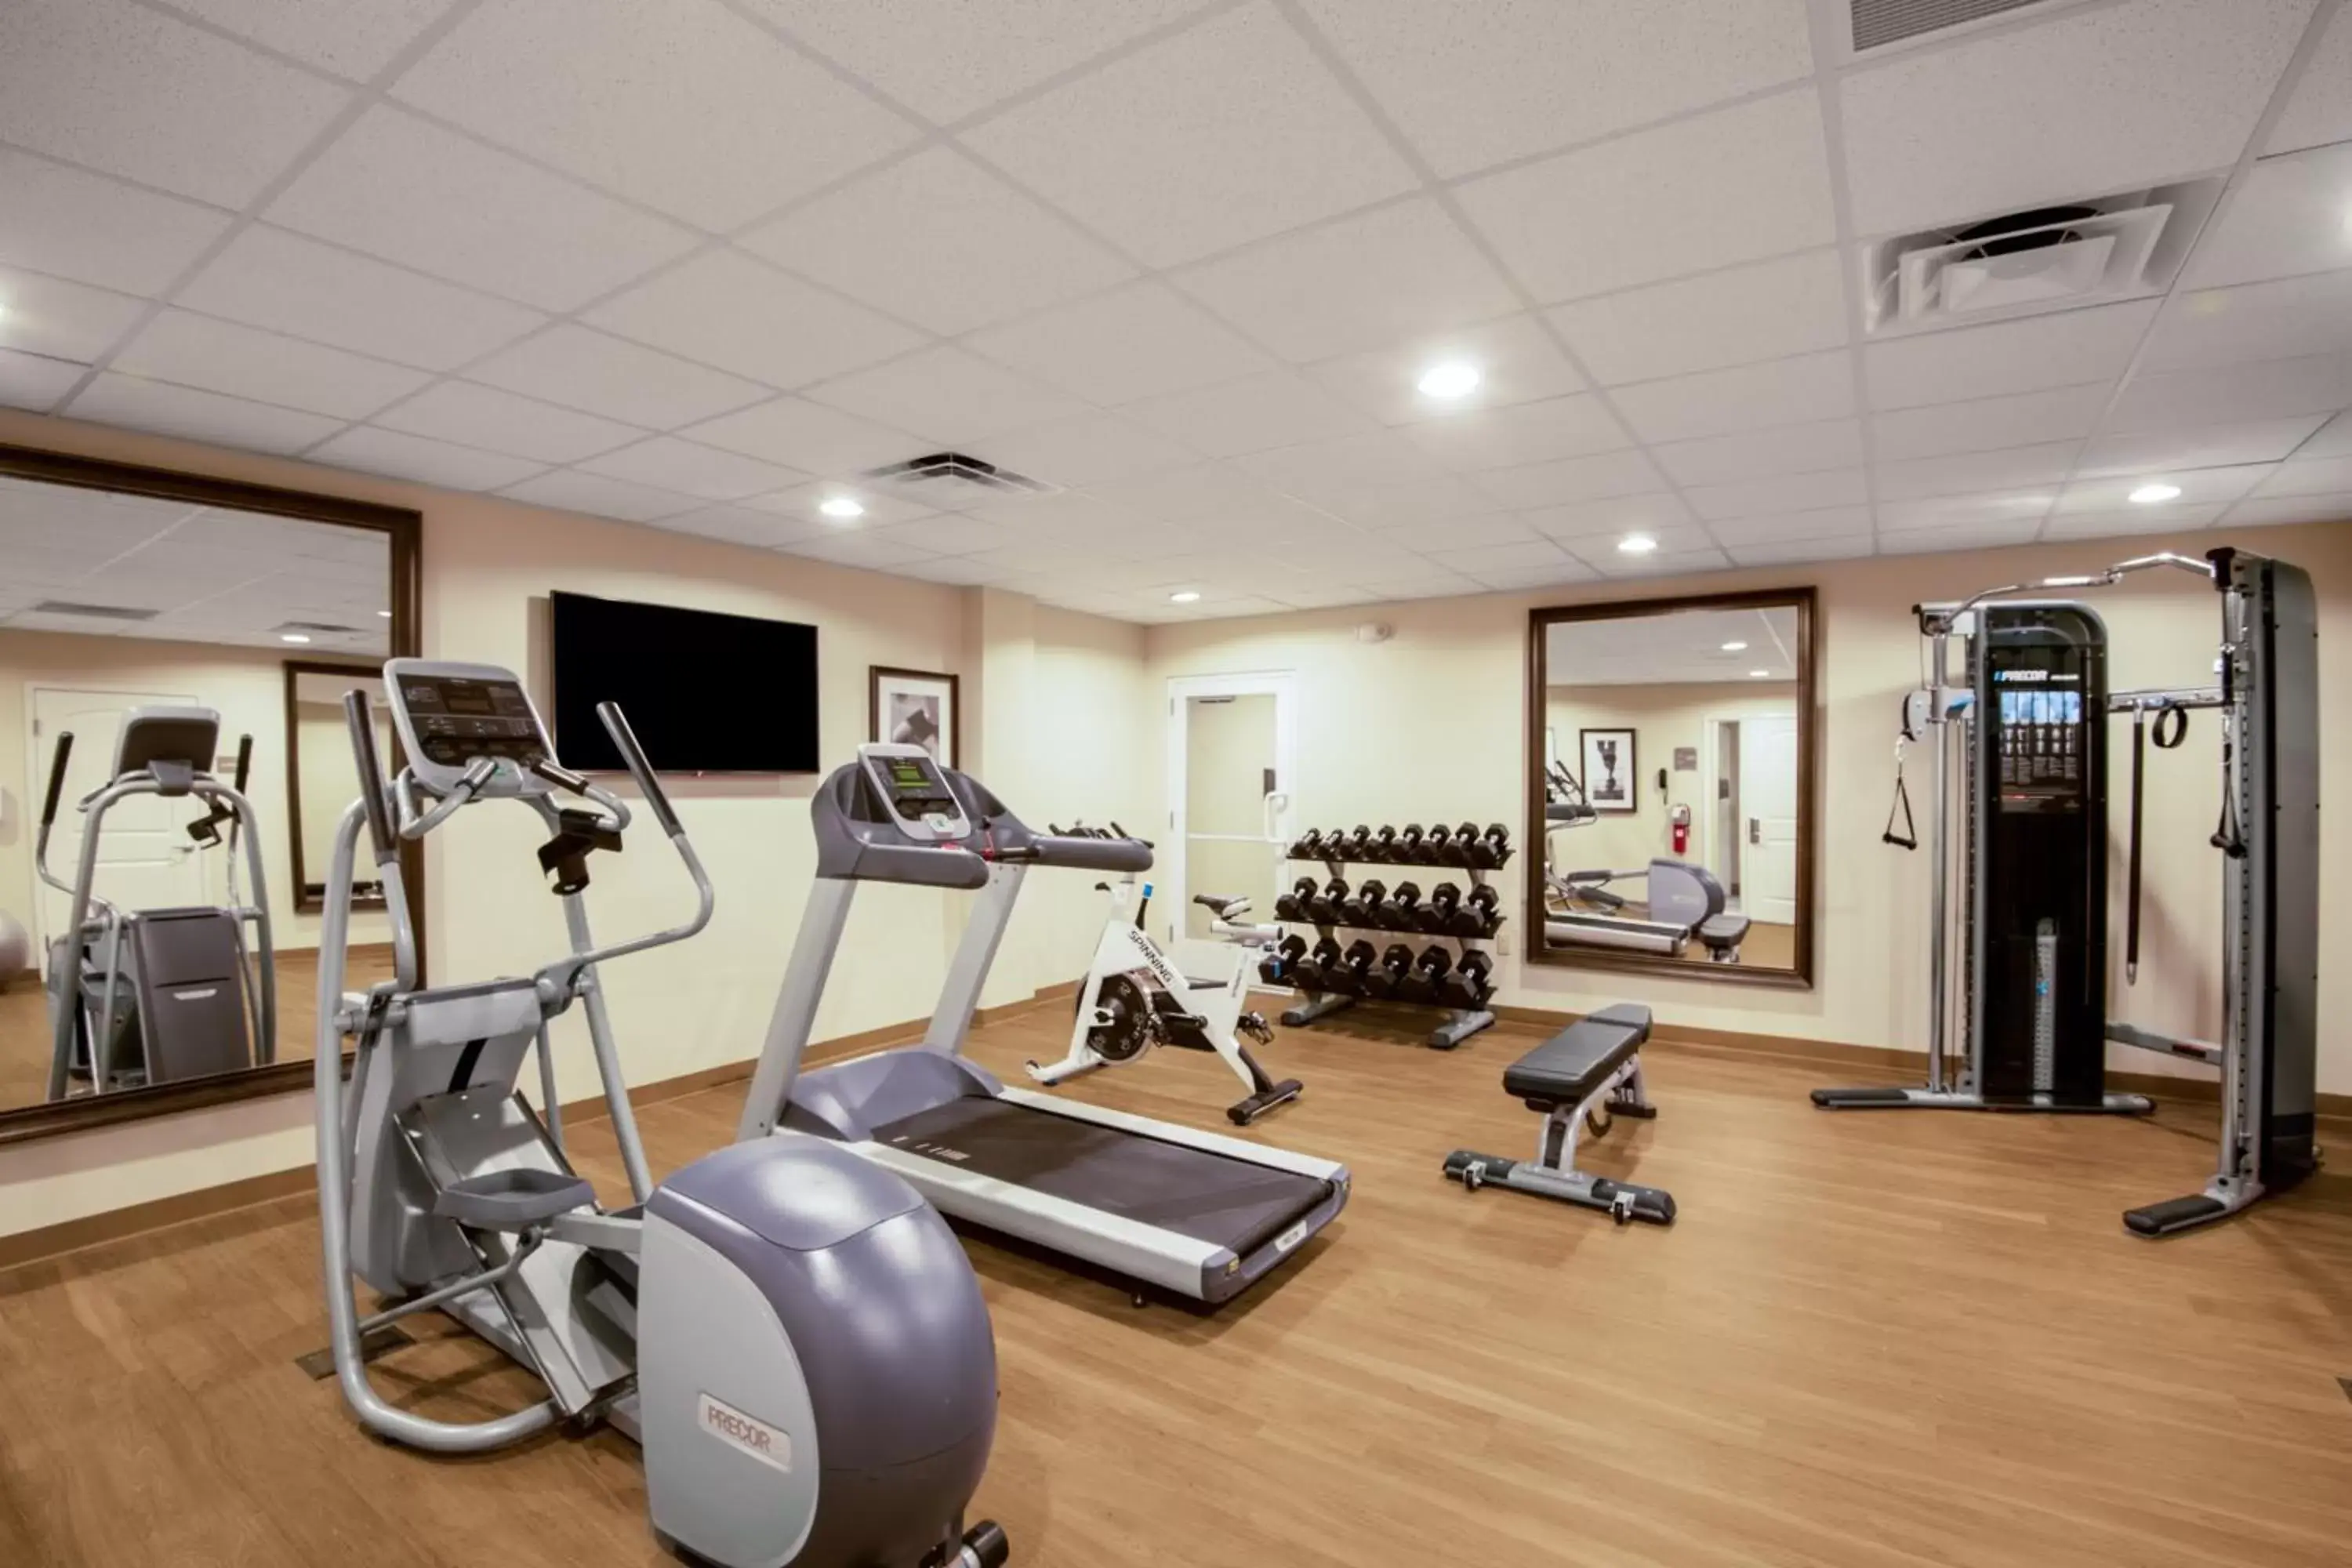 Fitness centre/facilities, Fitness Center/Facilities in Staybridge Suites - Scottsdale - Talking Stick, an IHG Hotel